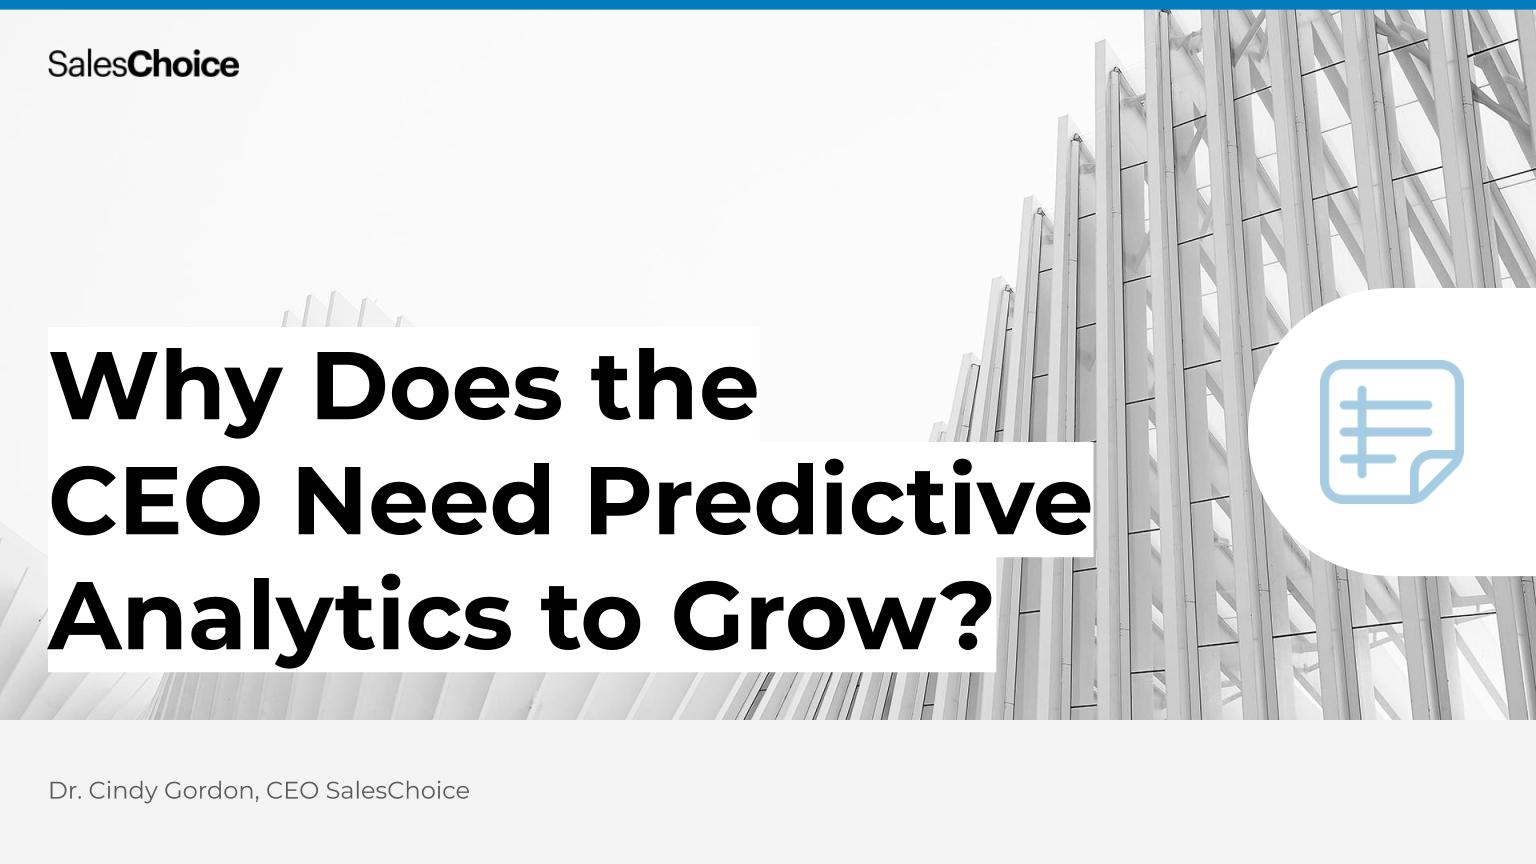 White paper: Why Does the CEO Need Predictive Analytics to Grow?